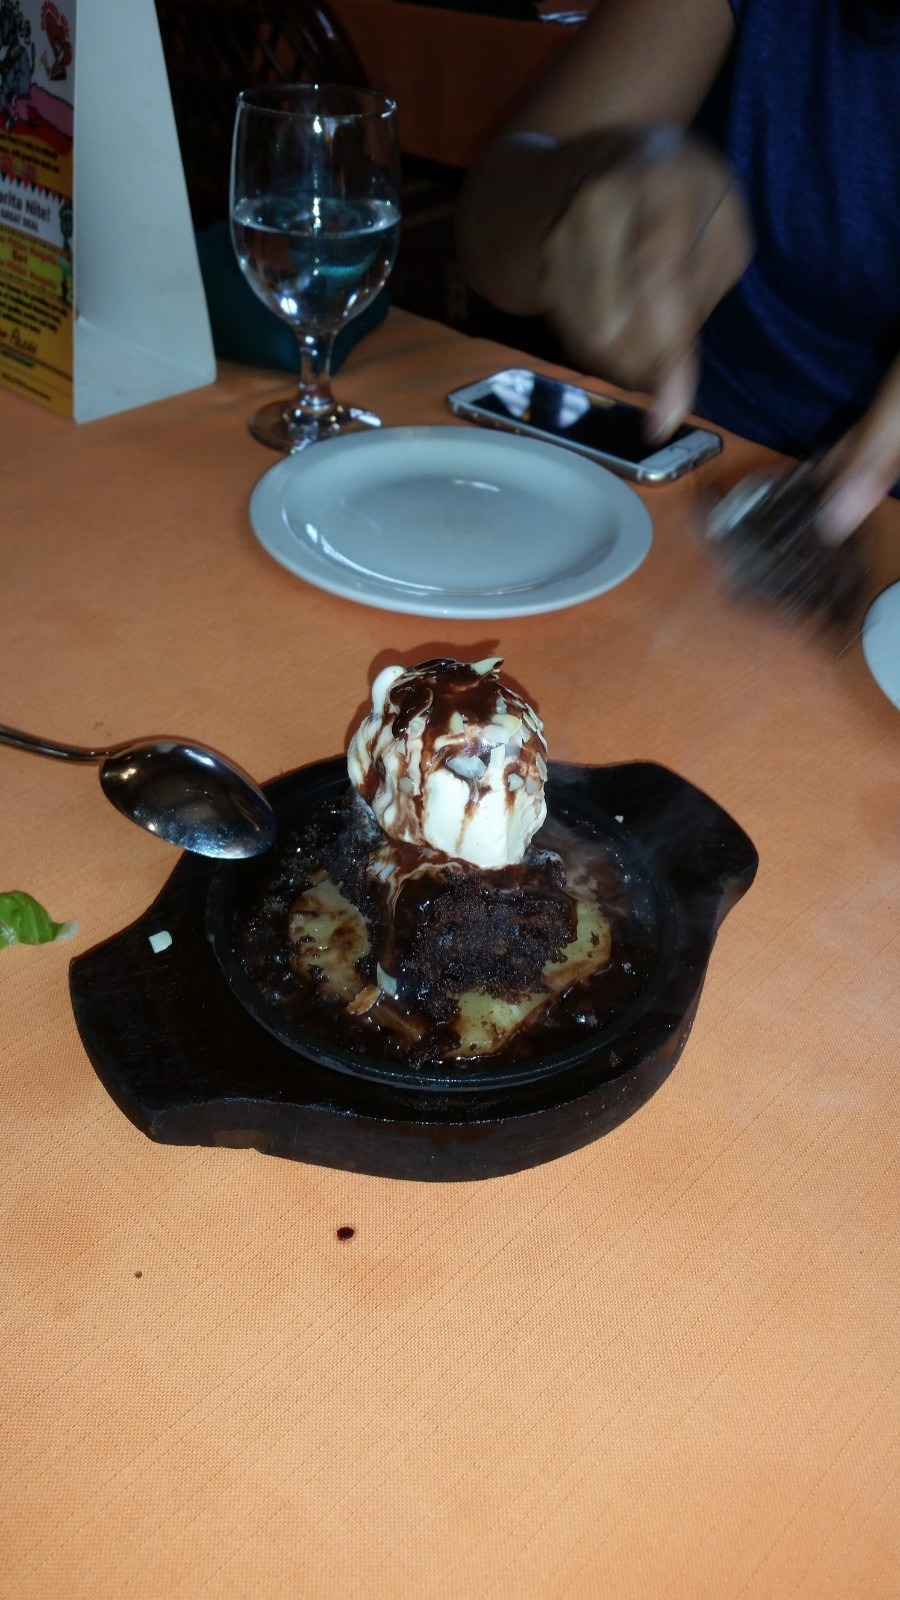 Sizzling brownie with ice cream @ The Warbler - البحرين